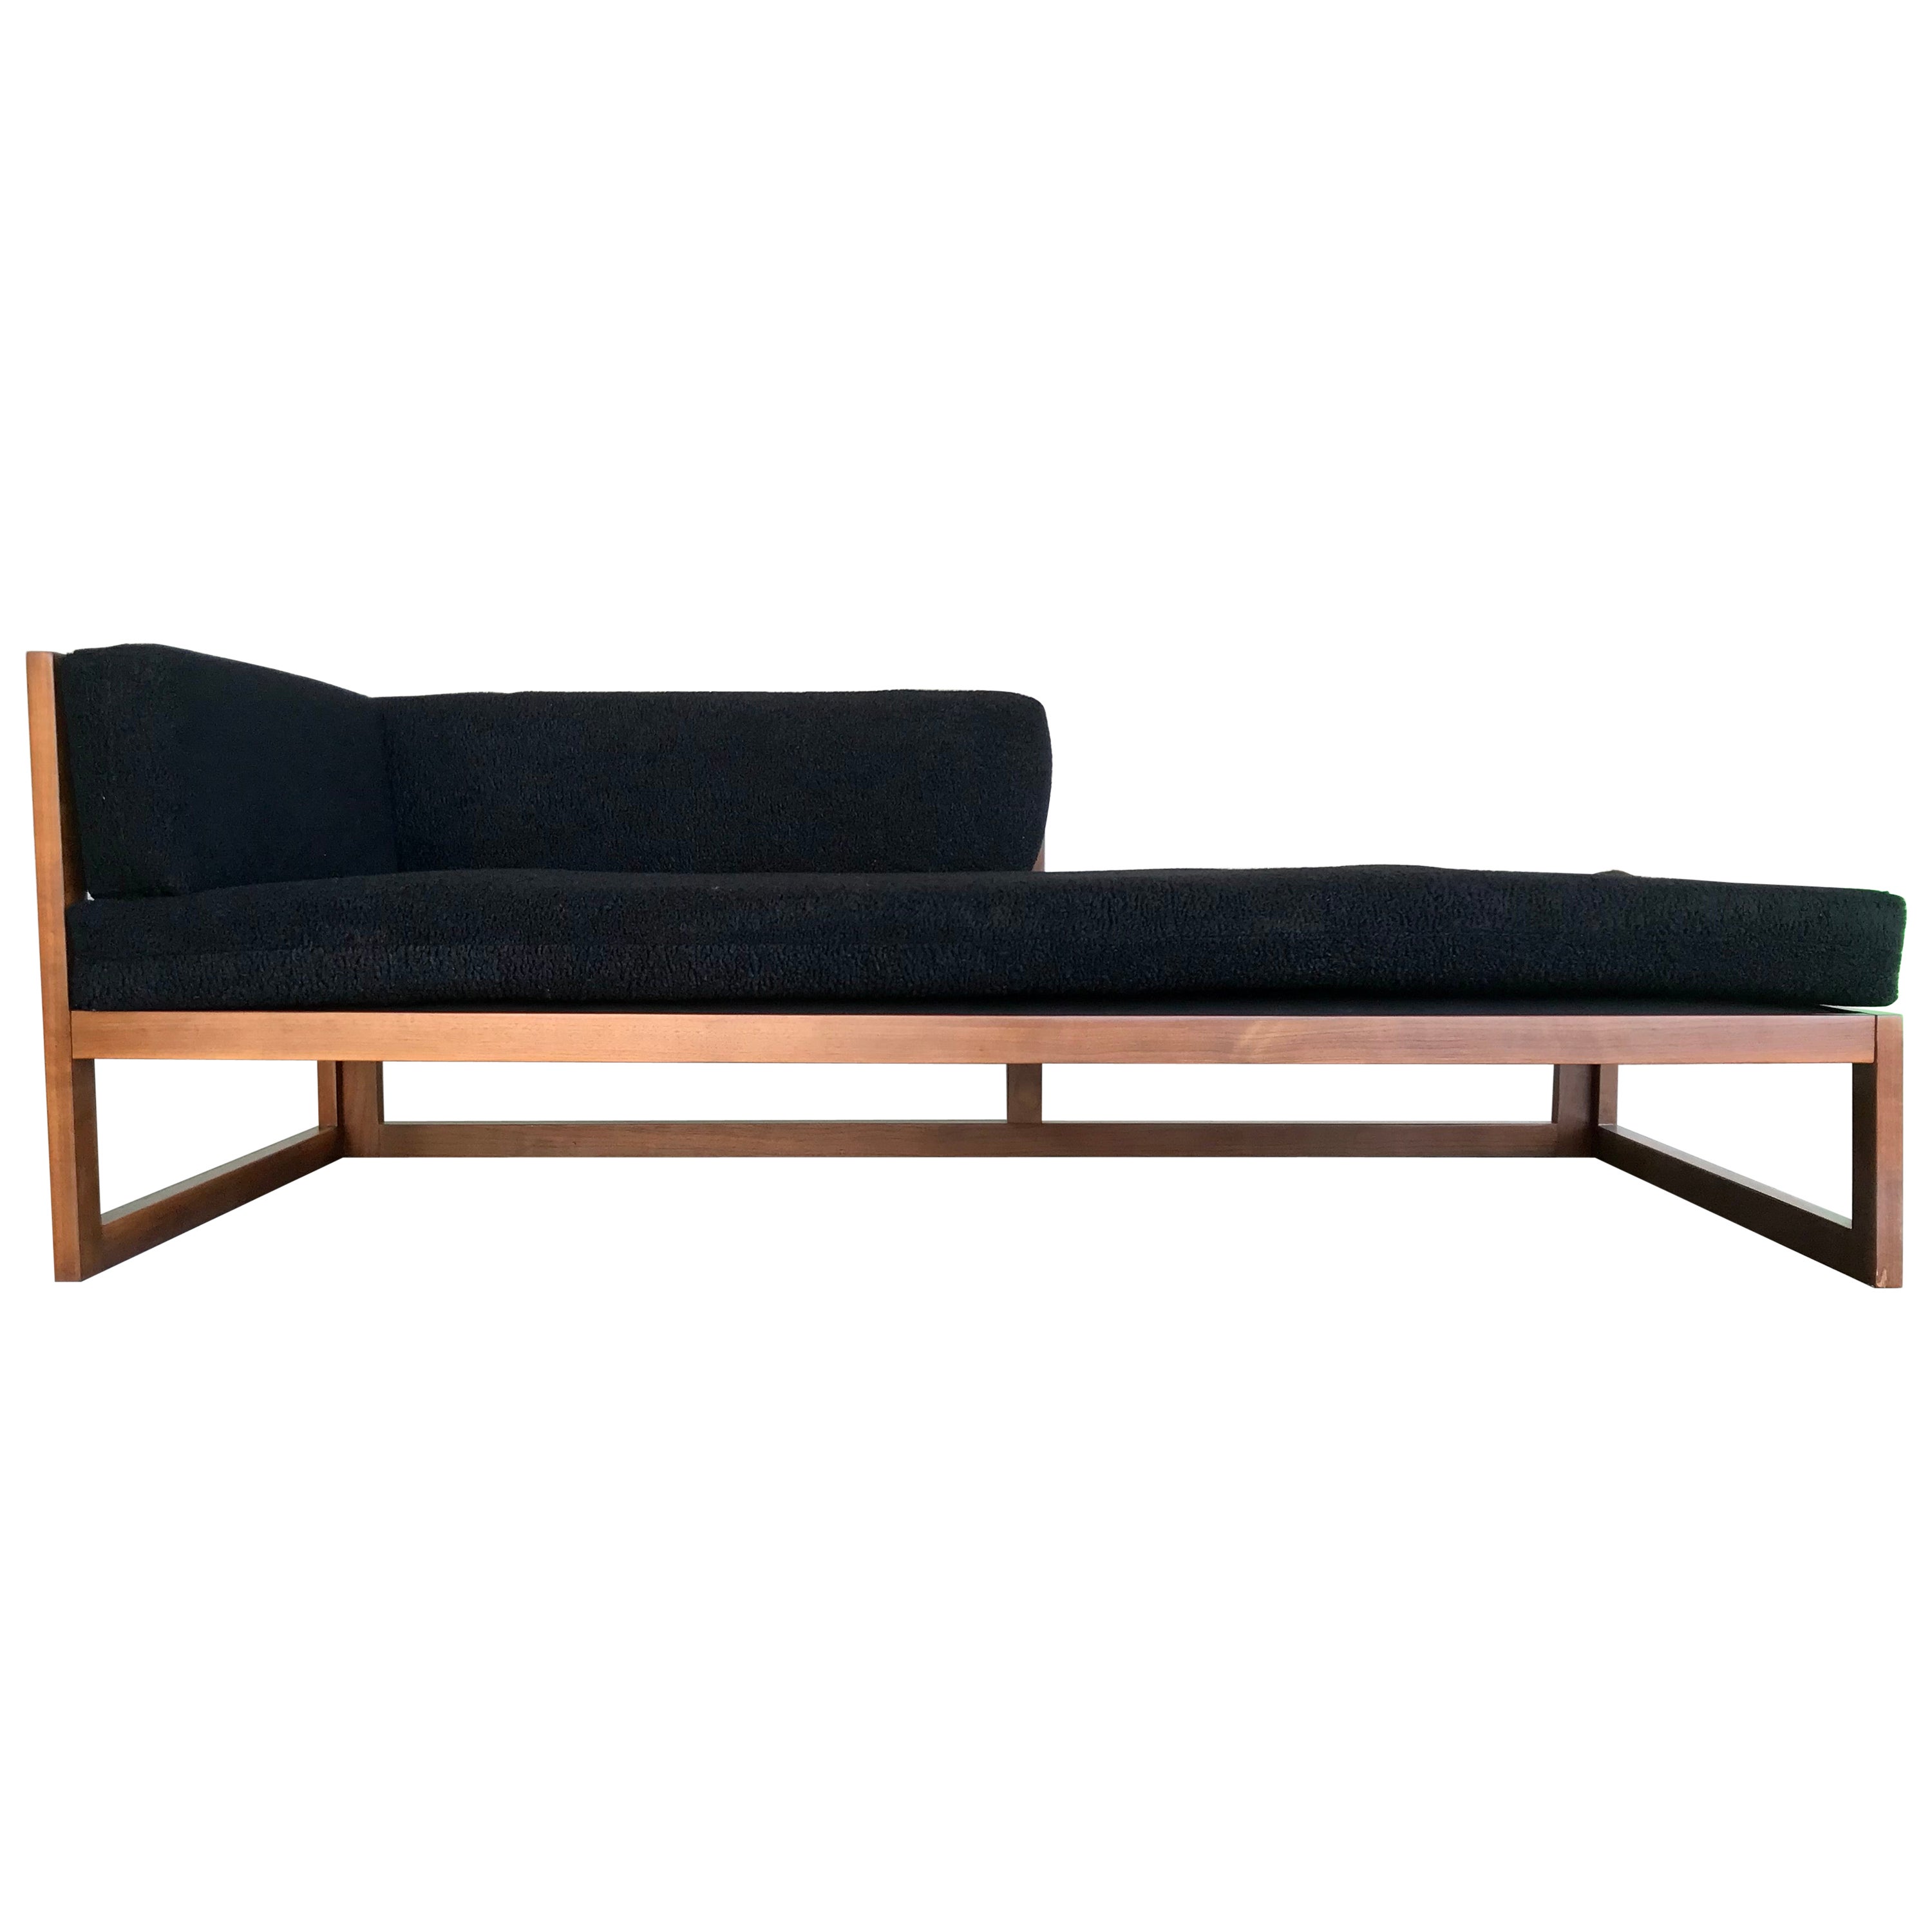 Architectural Design Chaise Lounge Daybed